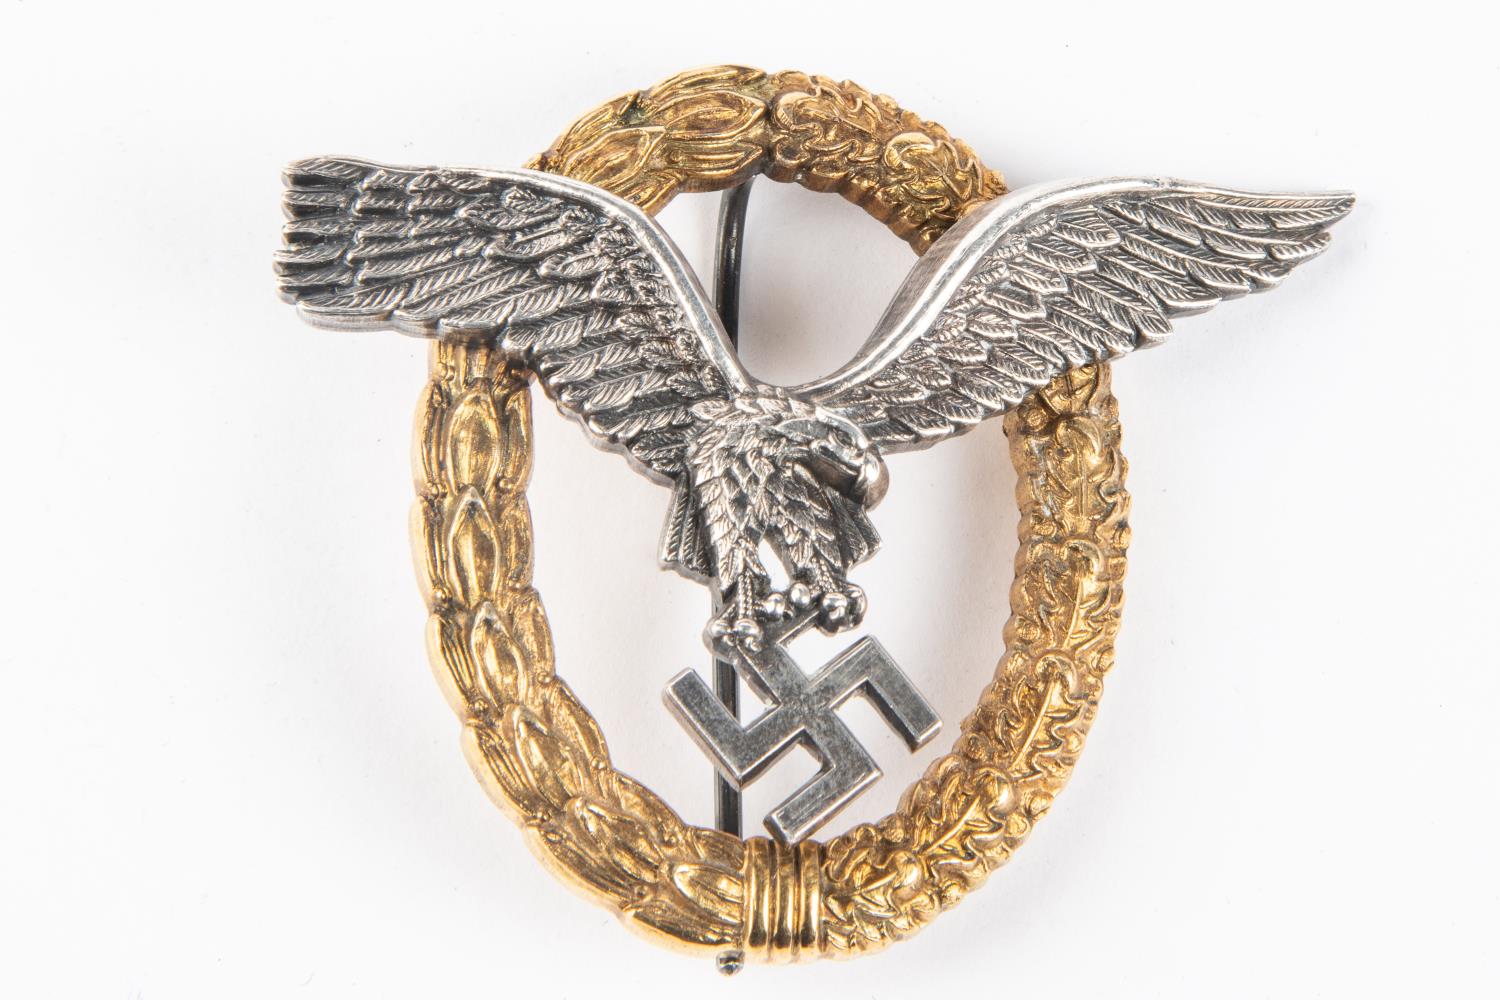 A Third Reich Luftwaffe observers breast badge, in silvered and gilt finish, marked on back "C E